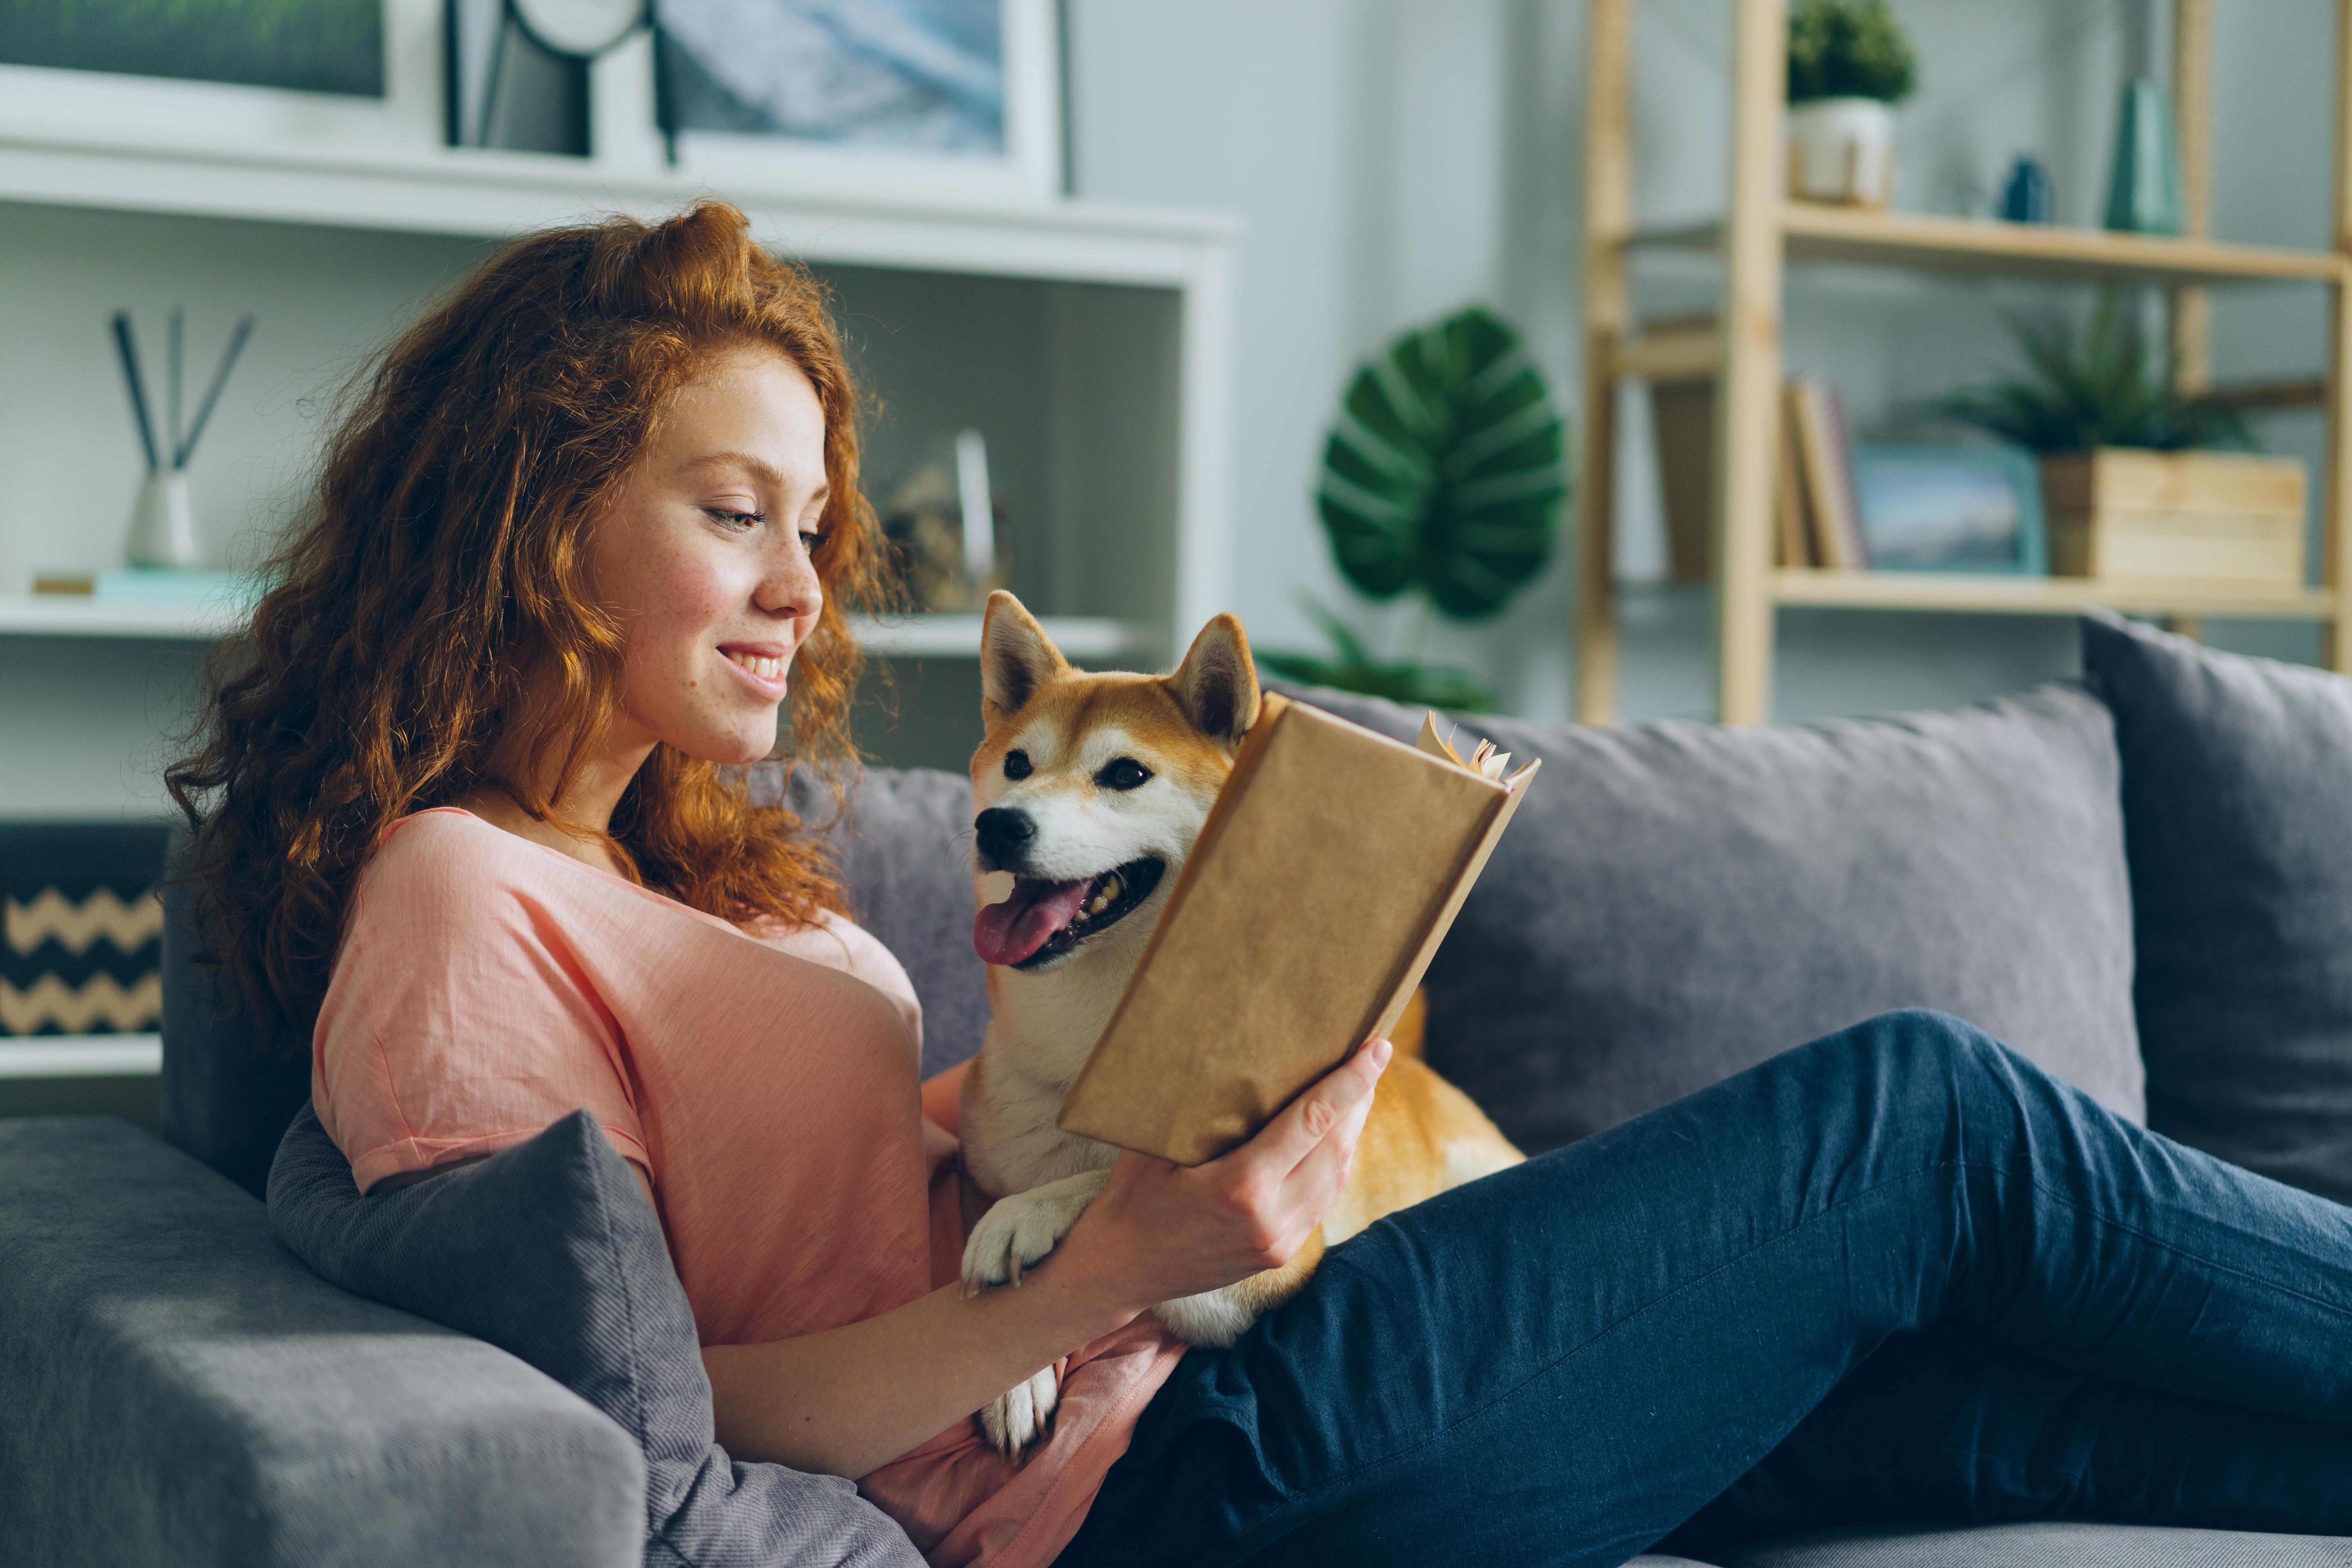 renters insurance with a dog